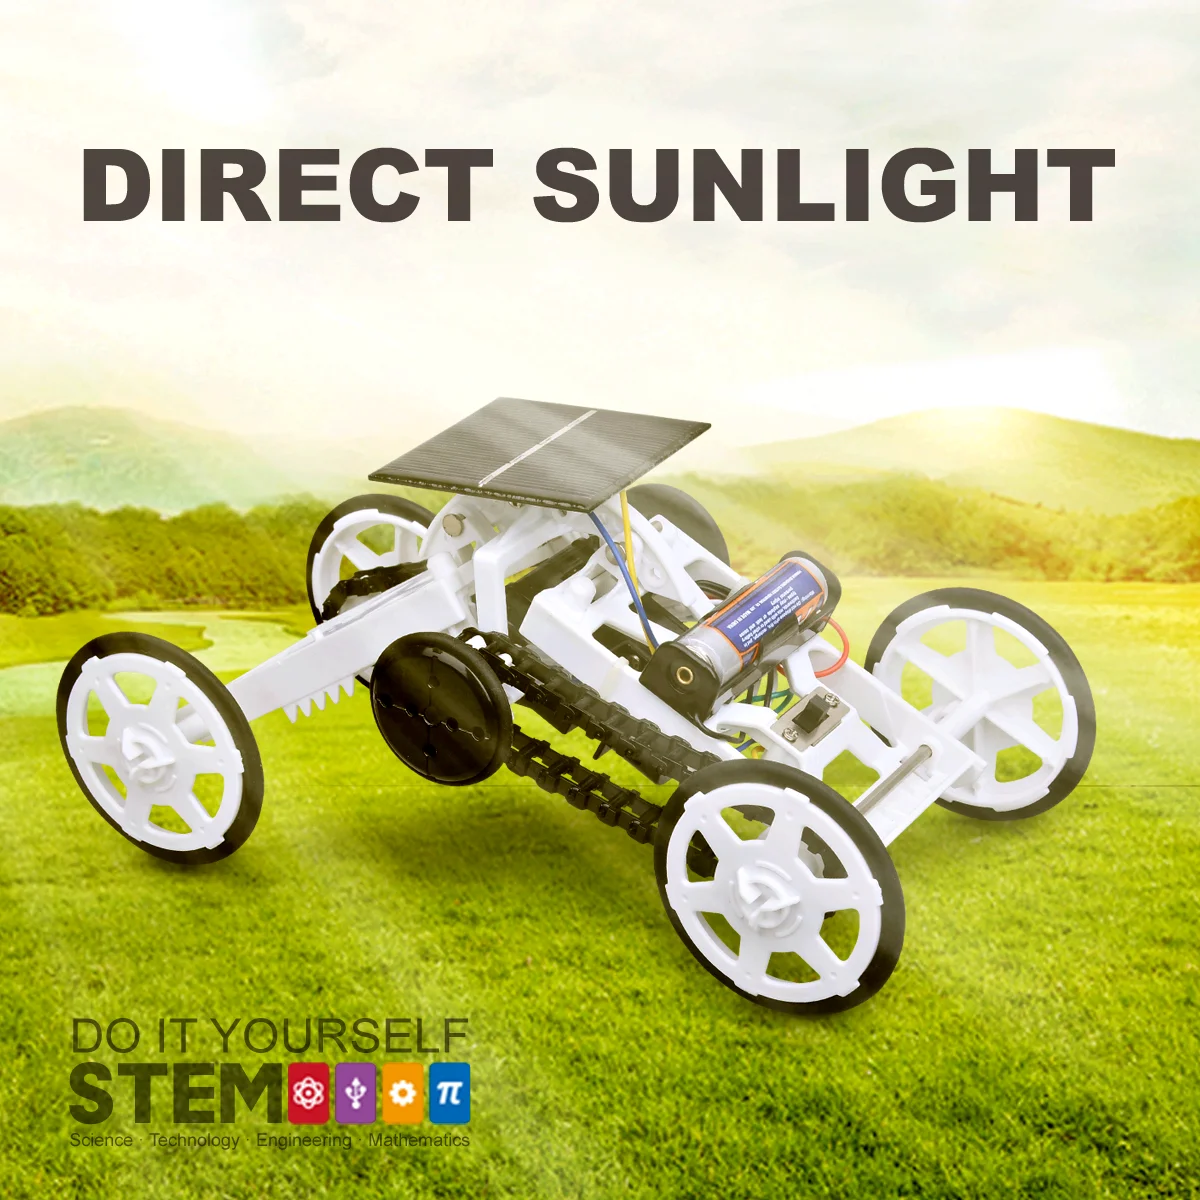 Wooden Solar Car Model Kits to Build, Car, Educational Science Kits for Kids  Age 8- 12, 3D Puzzles Toys for Boys System - AliExpress